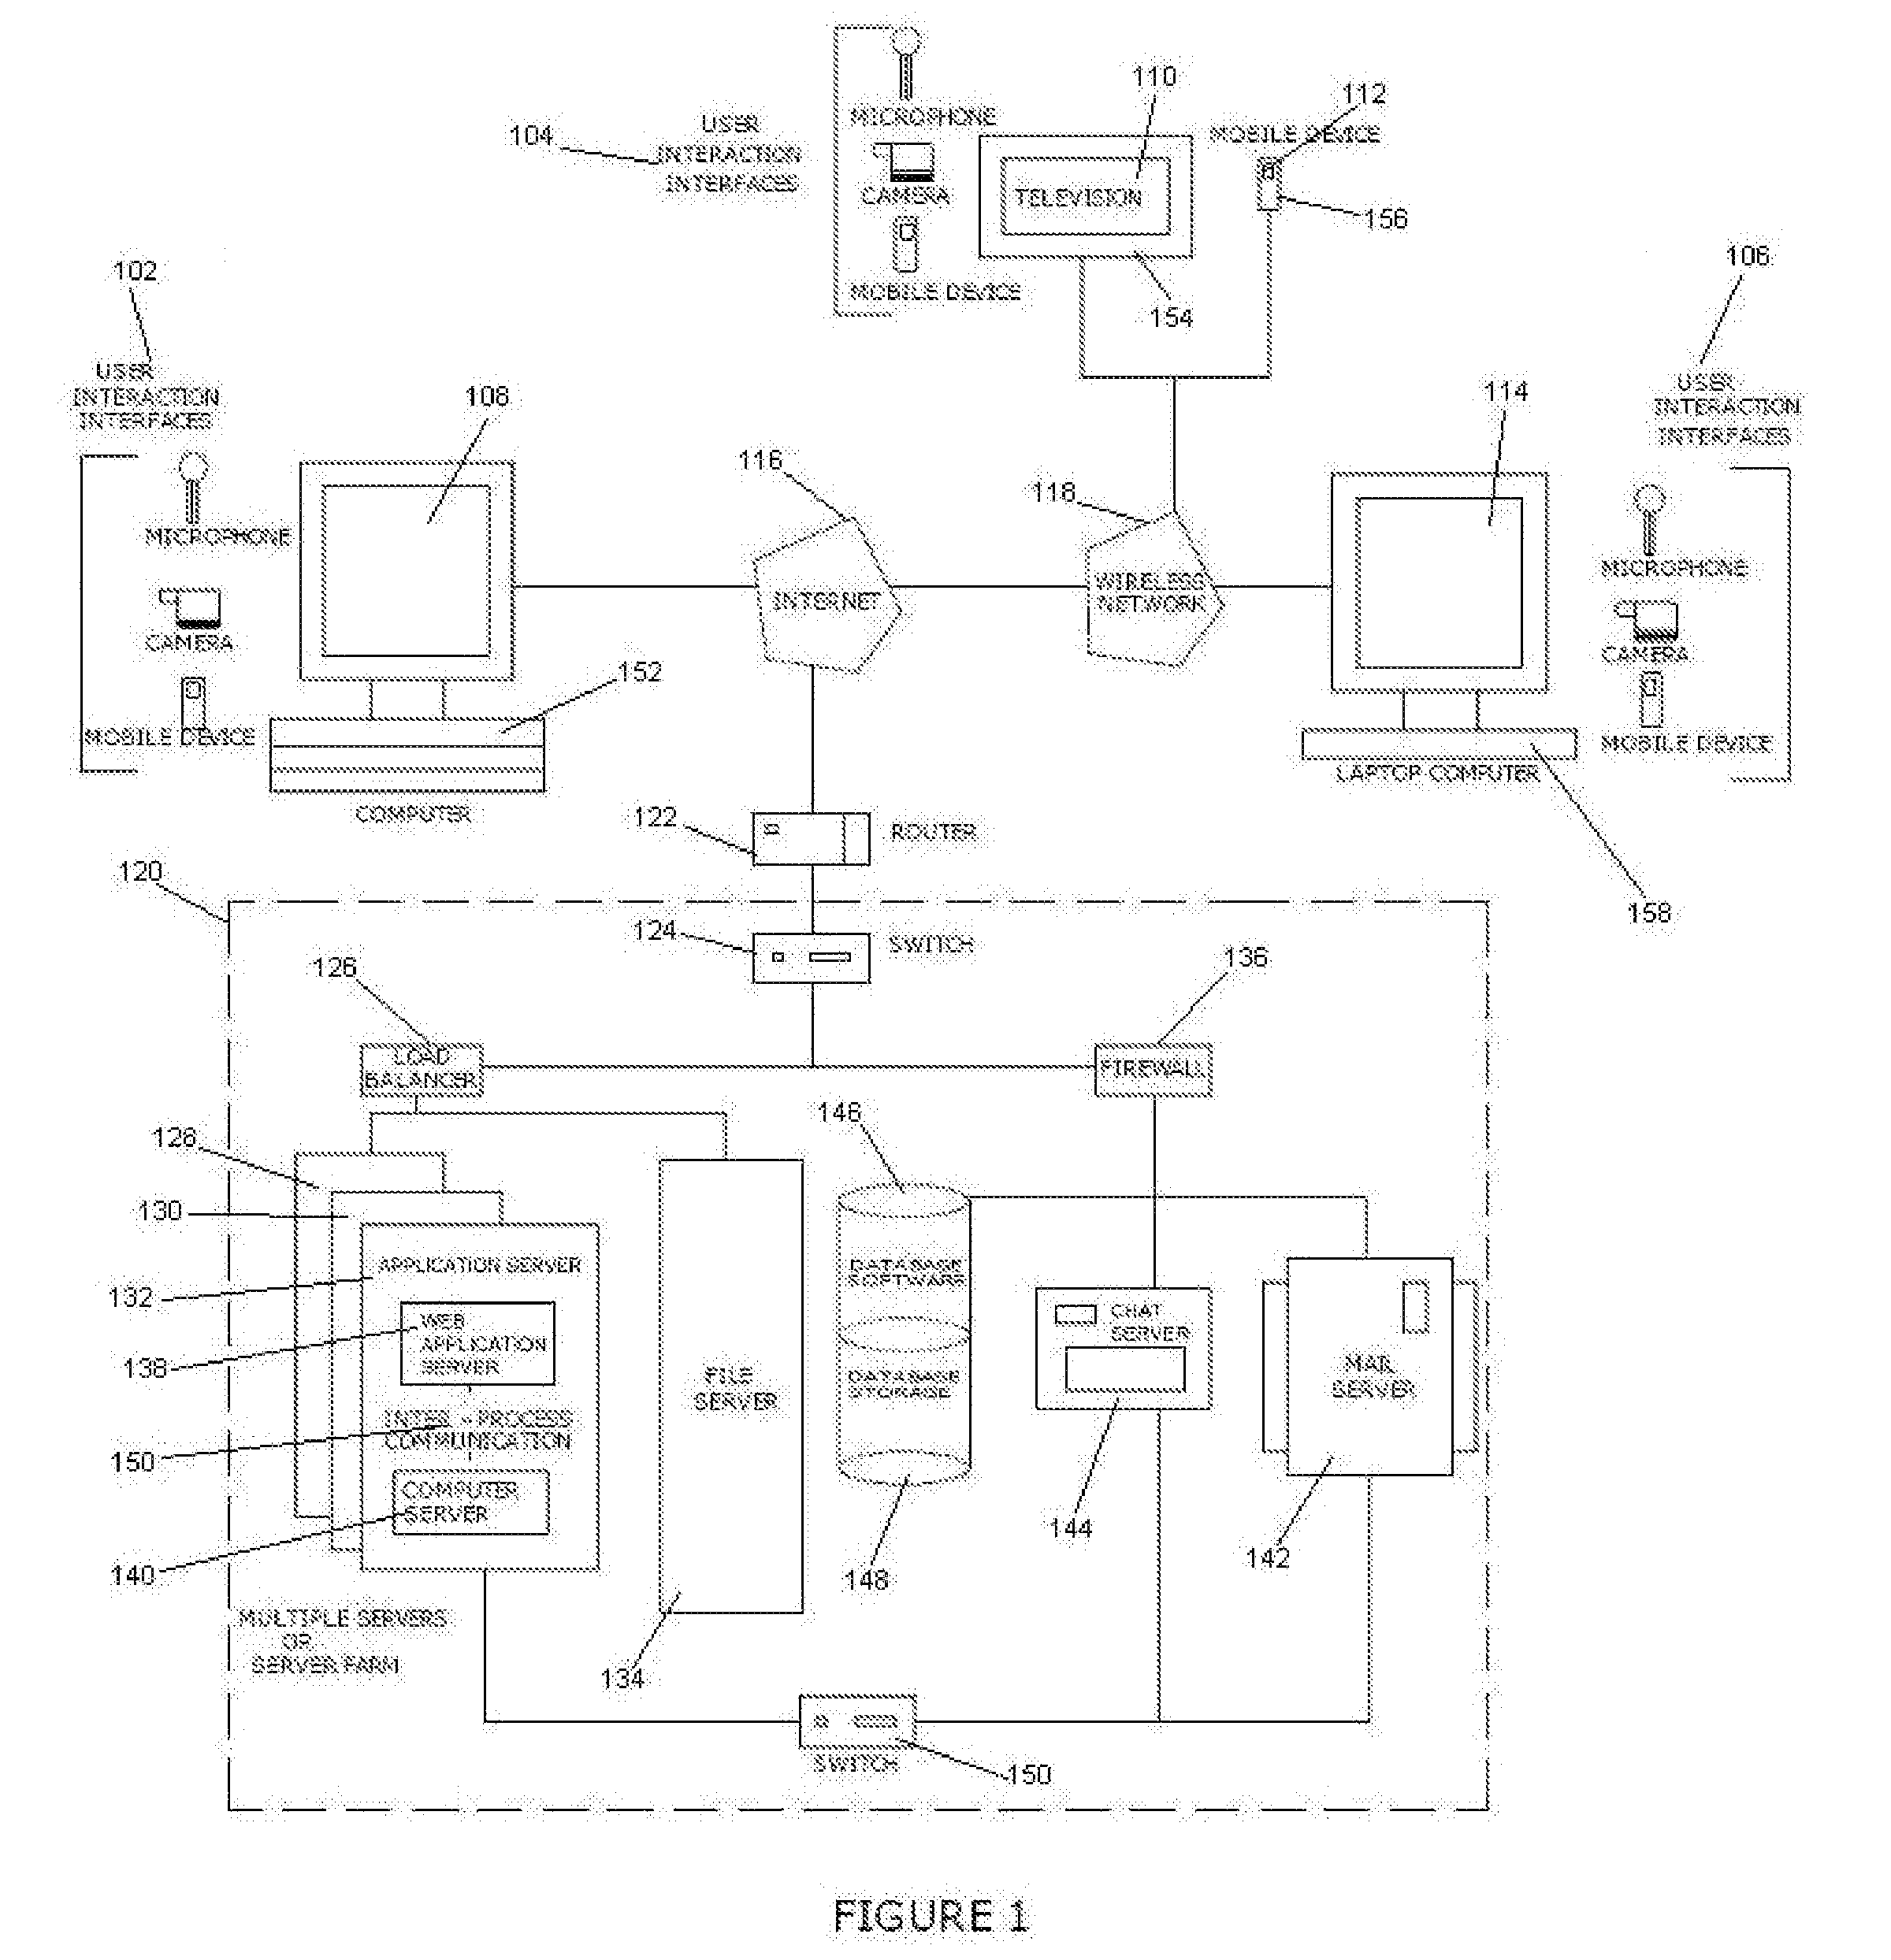 System, method, and apparatus for providing storage operations on an online computer system